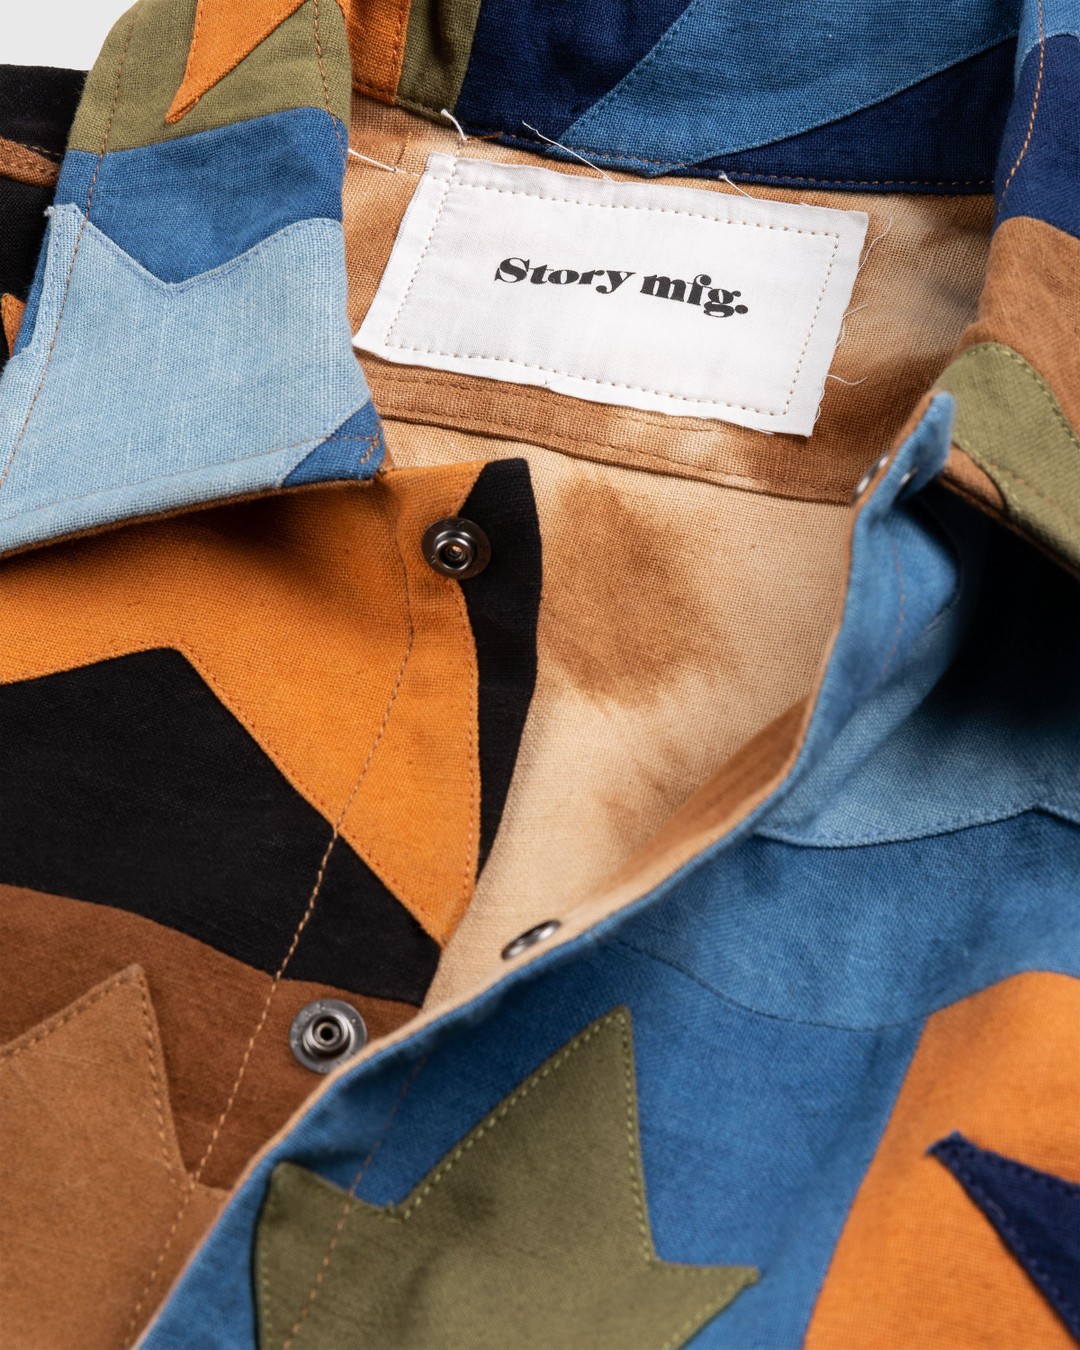 Story mfg. – Worf Jacket Star Scraps Patchwork - Outerwear - Multi - Image 6